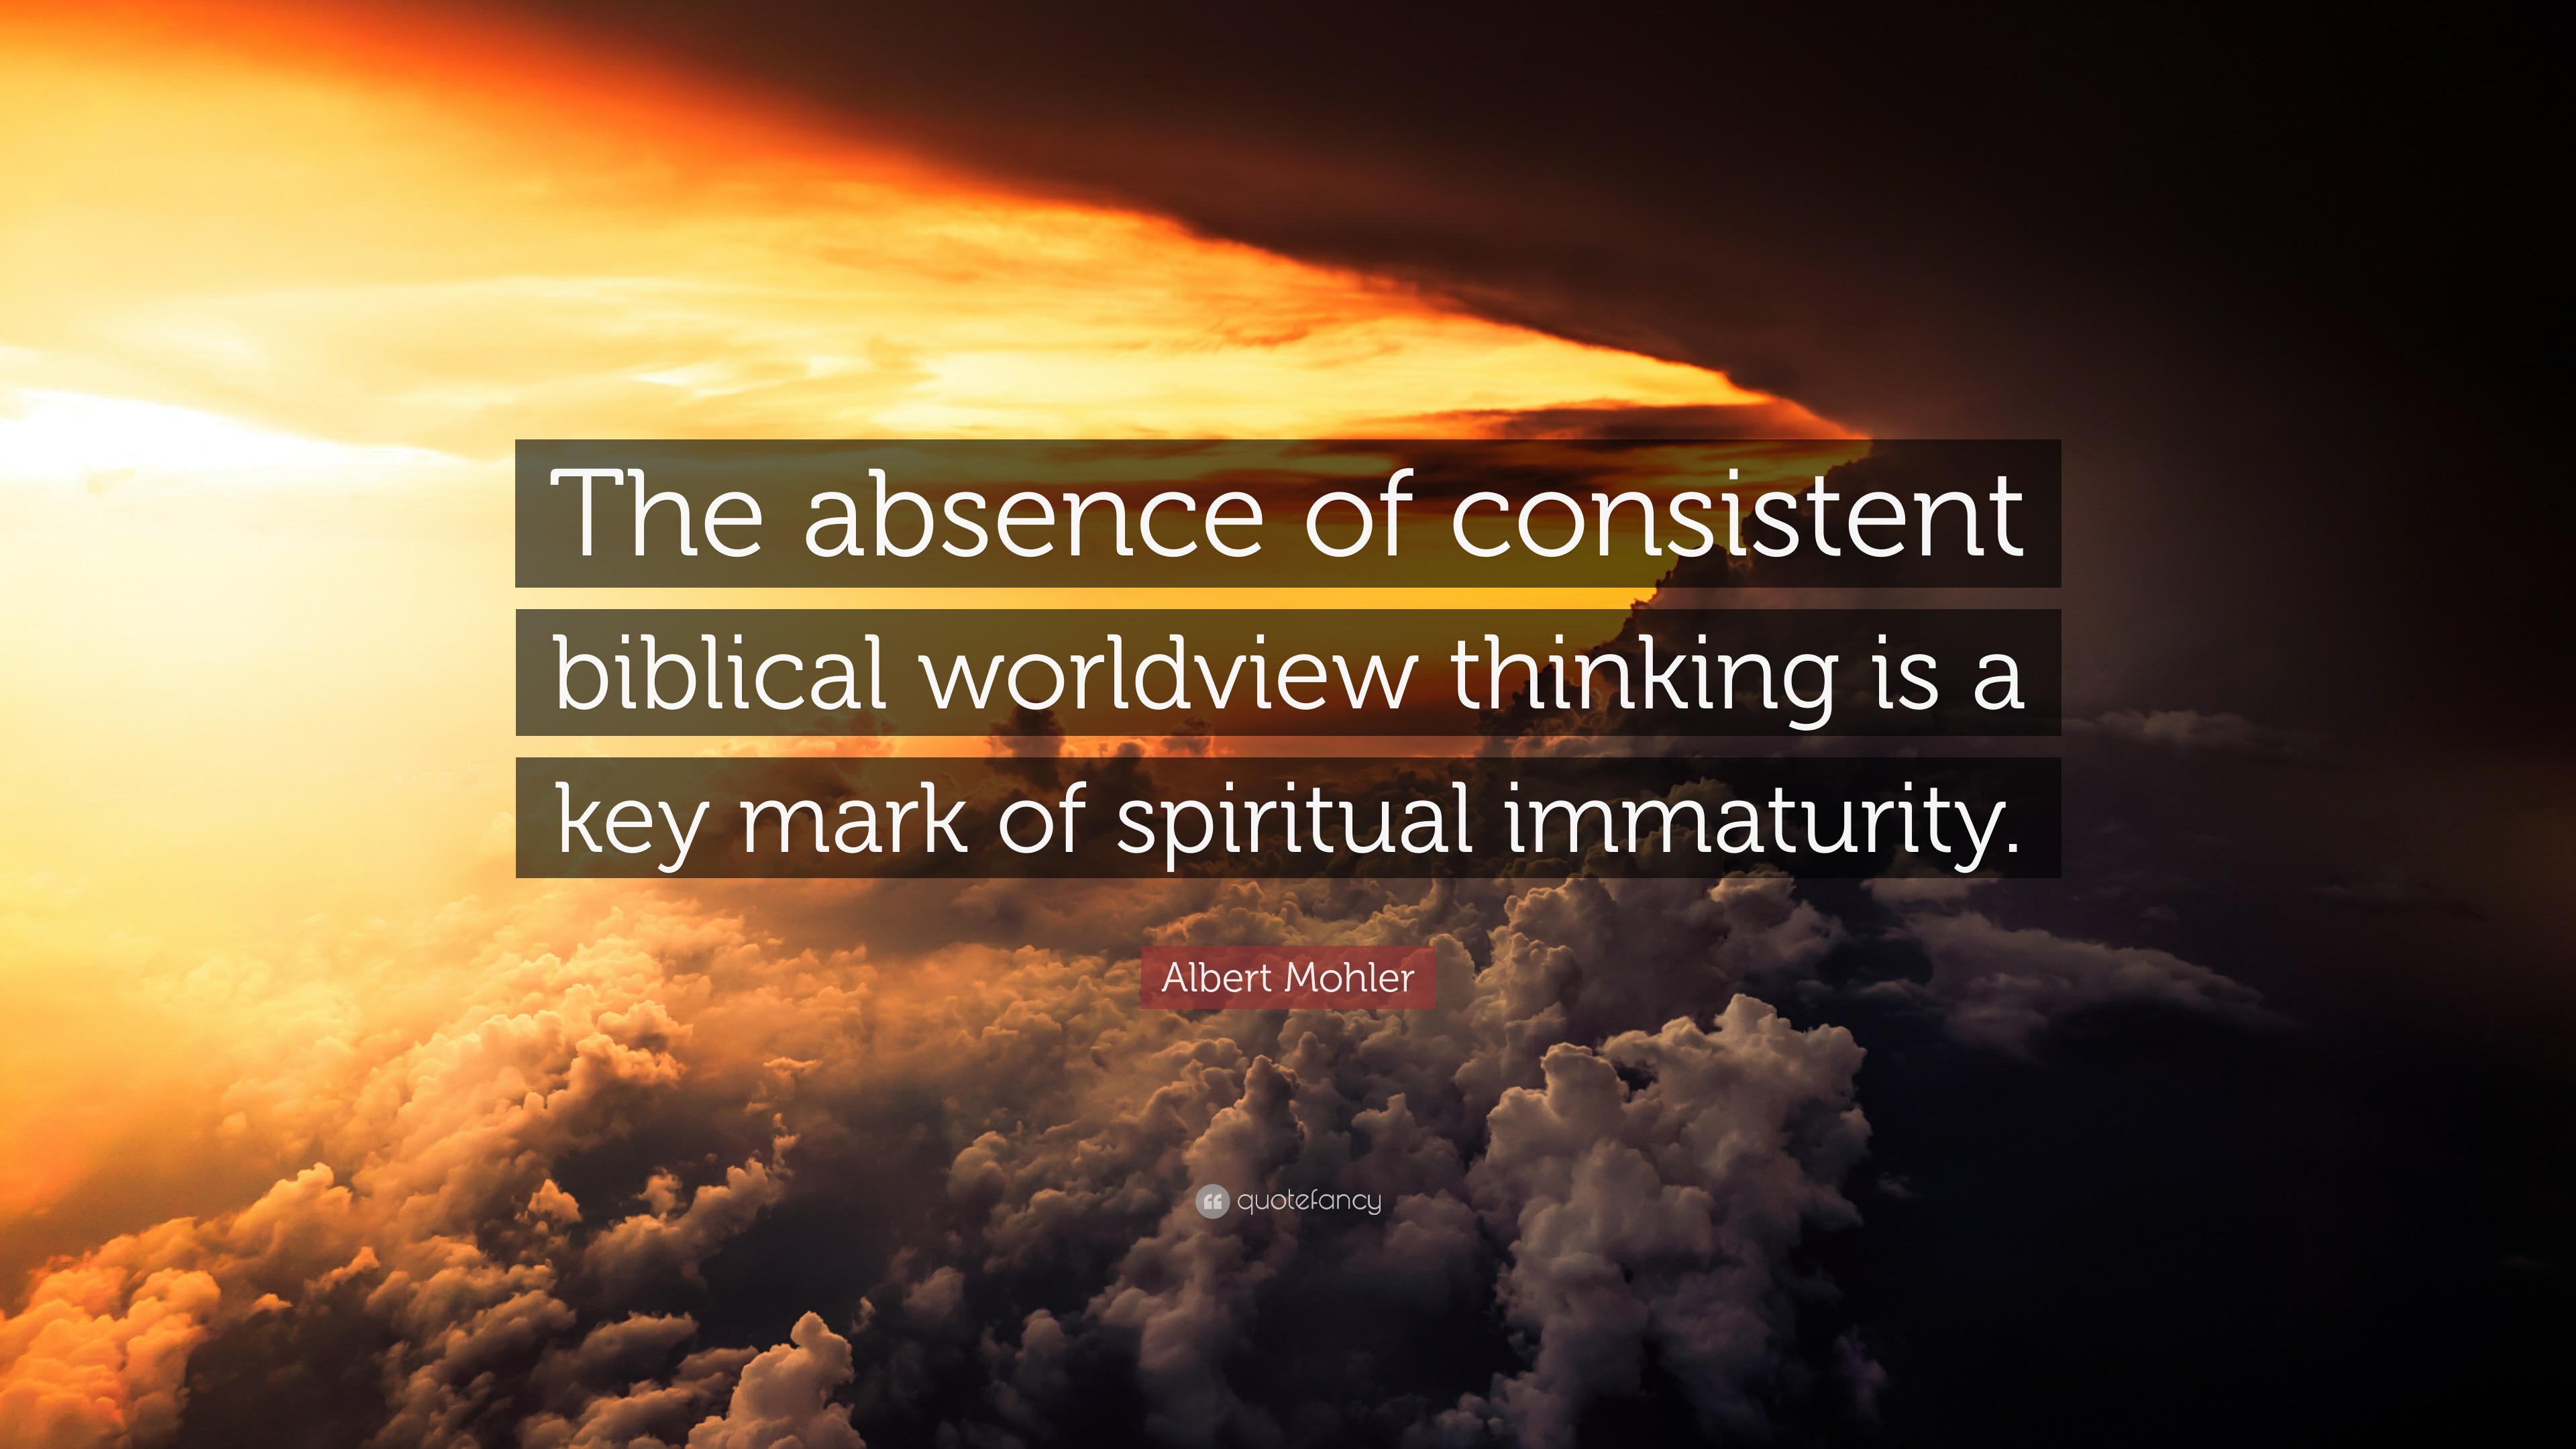 Albert Mohler Quote: “The absence of consistent biblical worldview ...